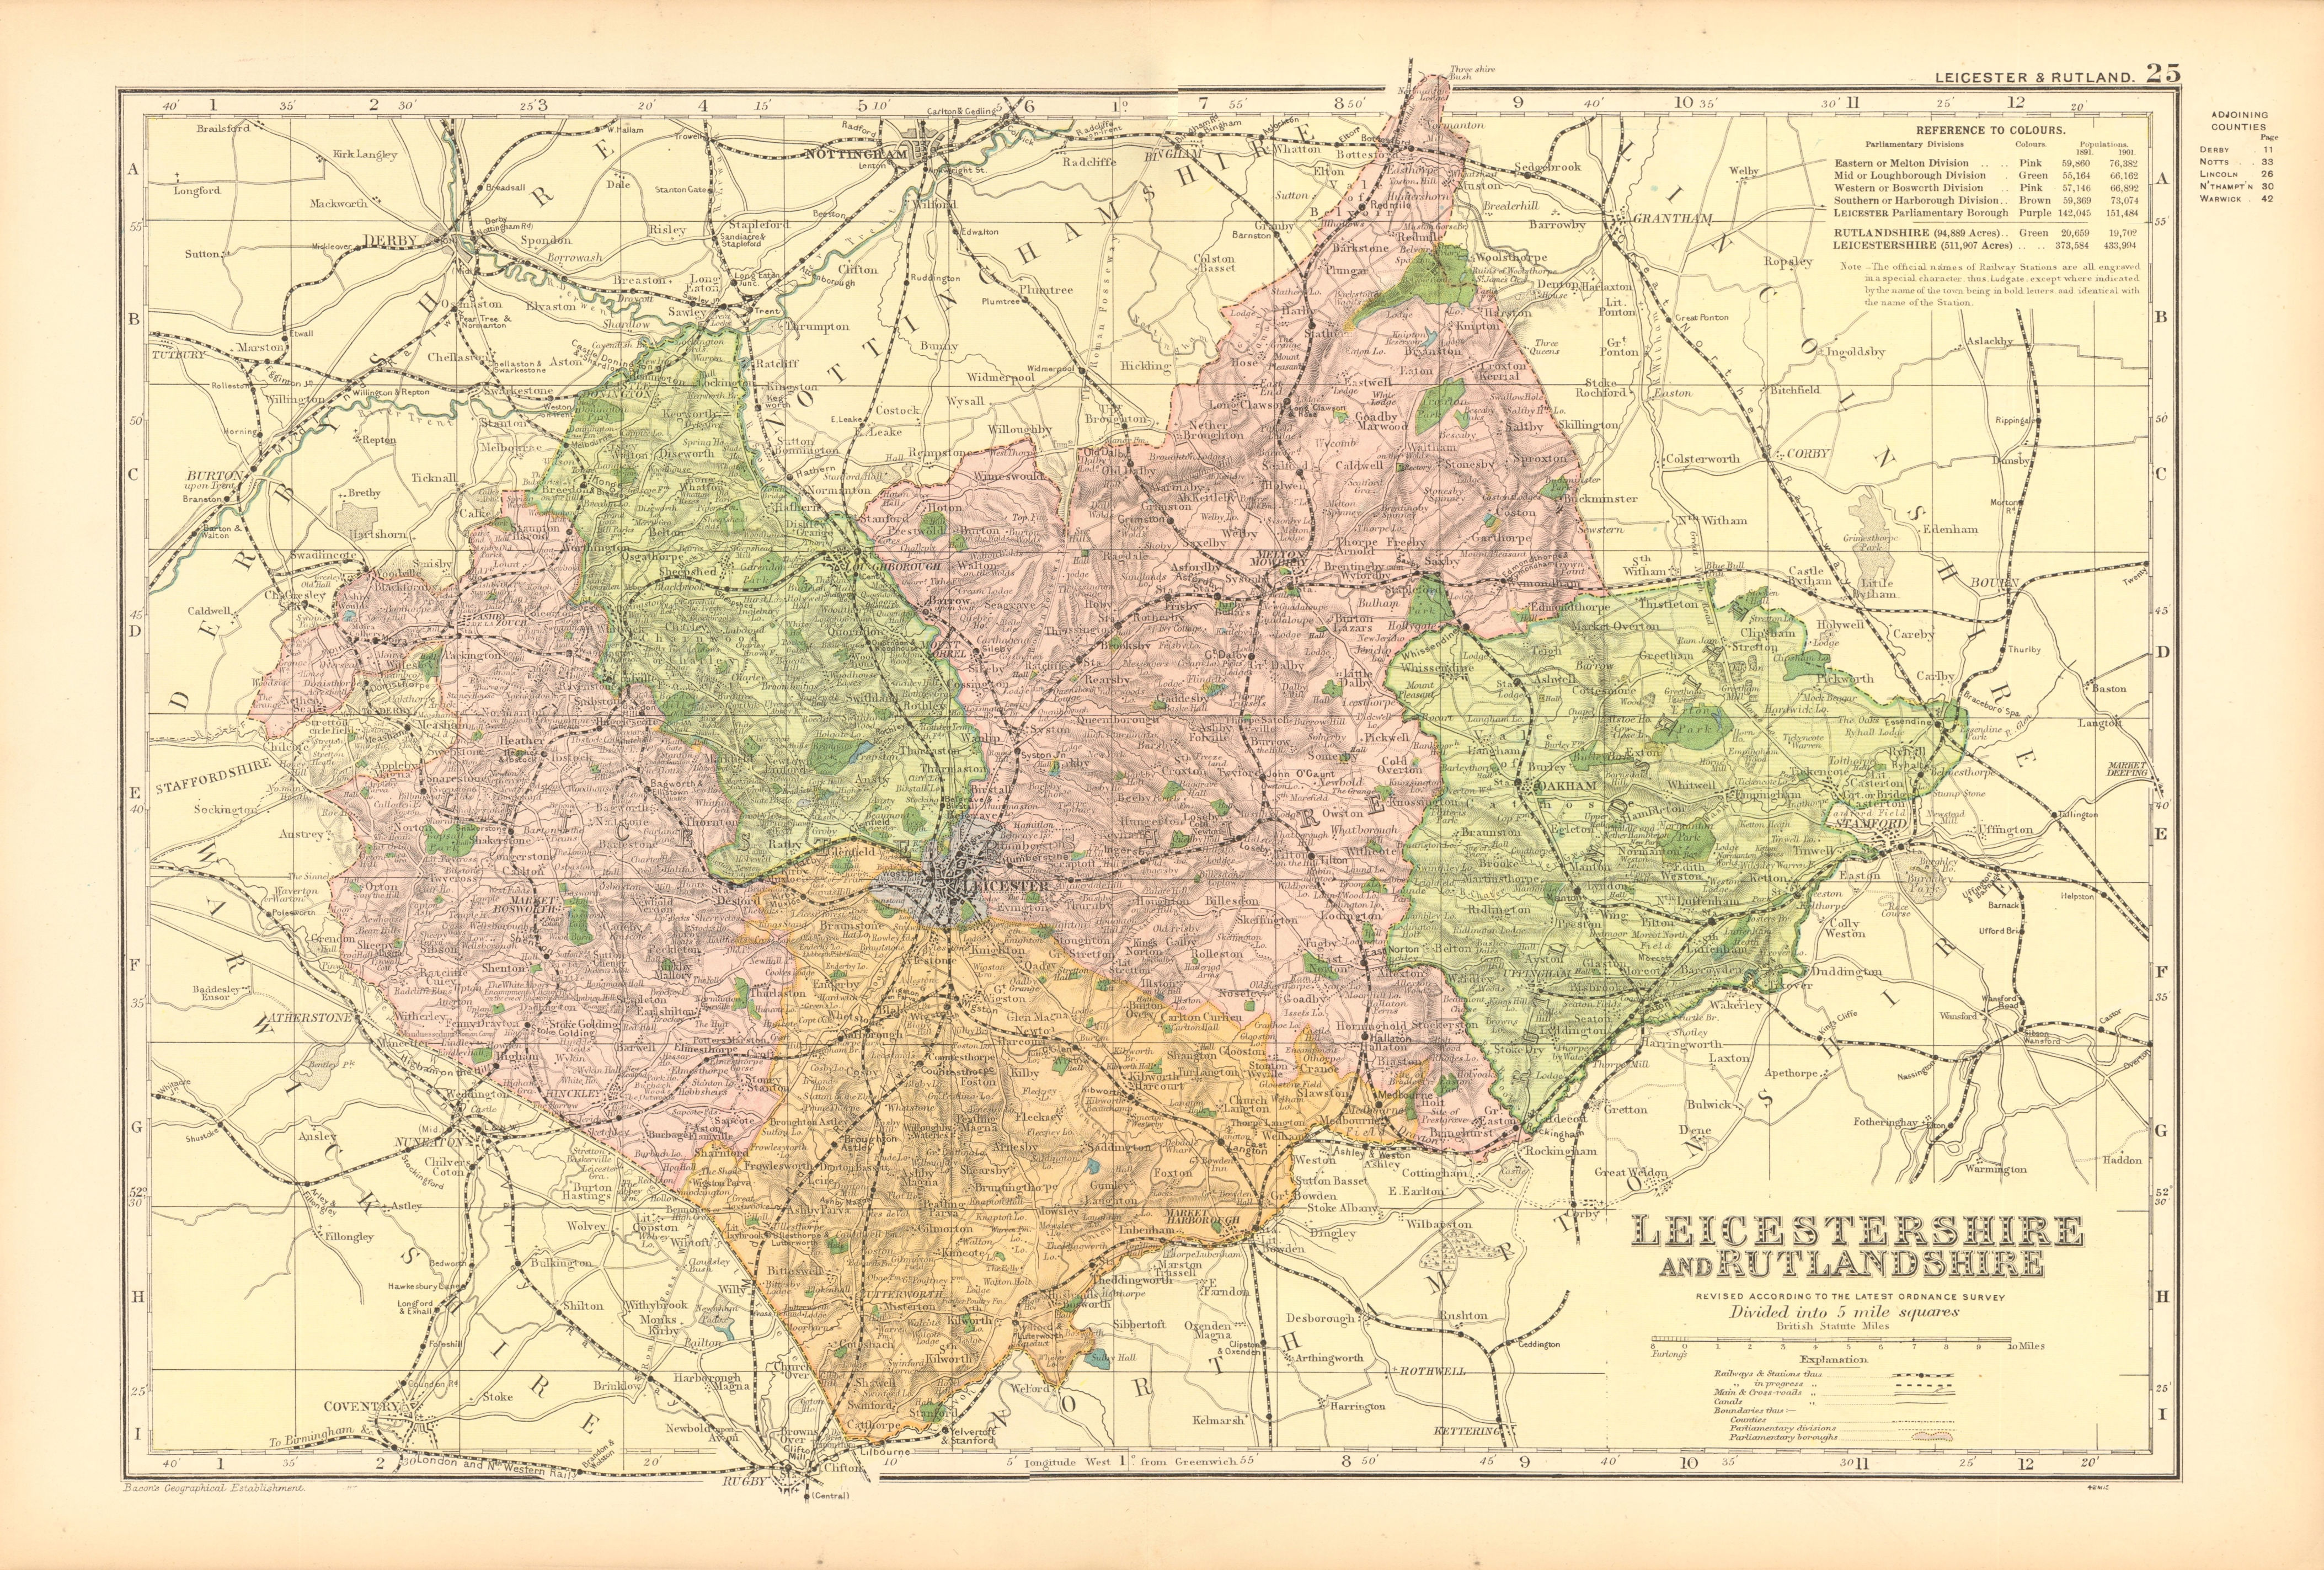 Associate Product LEICESTERSHIRE AND RUTLANDSHIRE. Parliamentary divisions & parks. BACON 1904 map